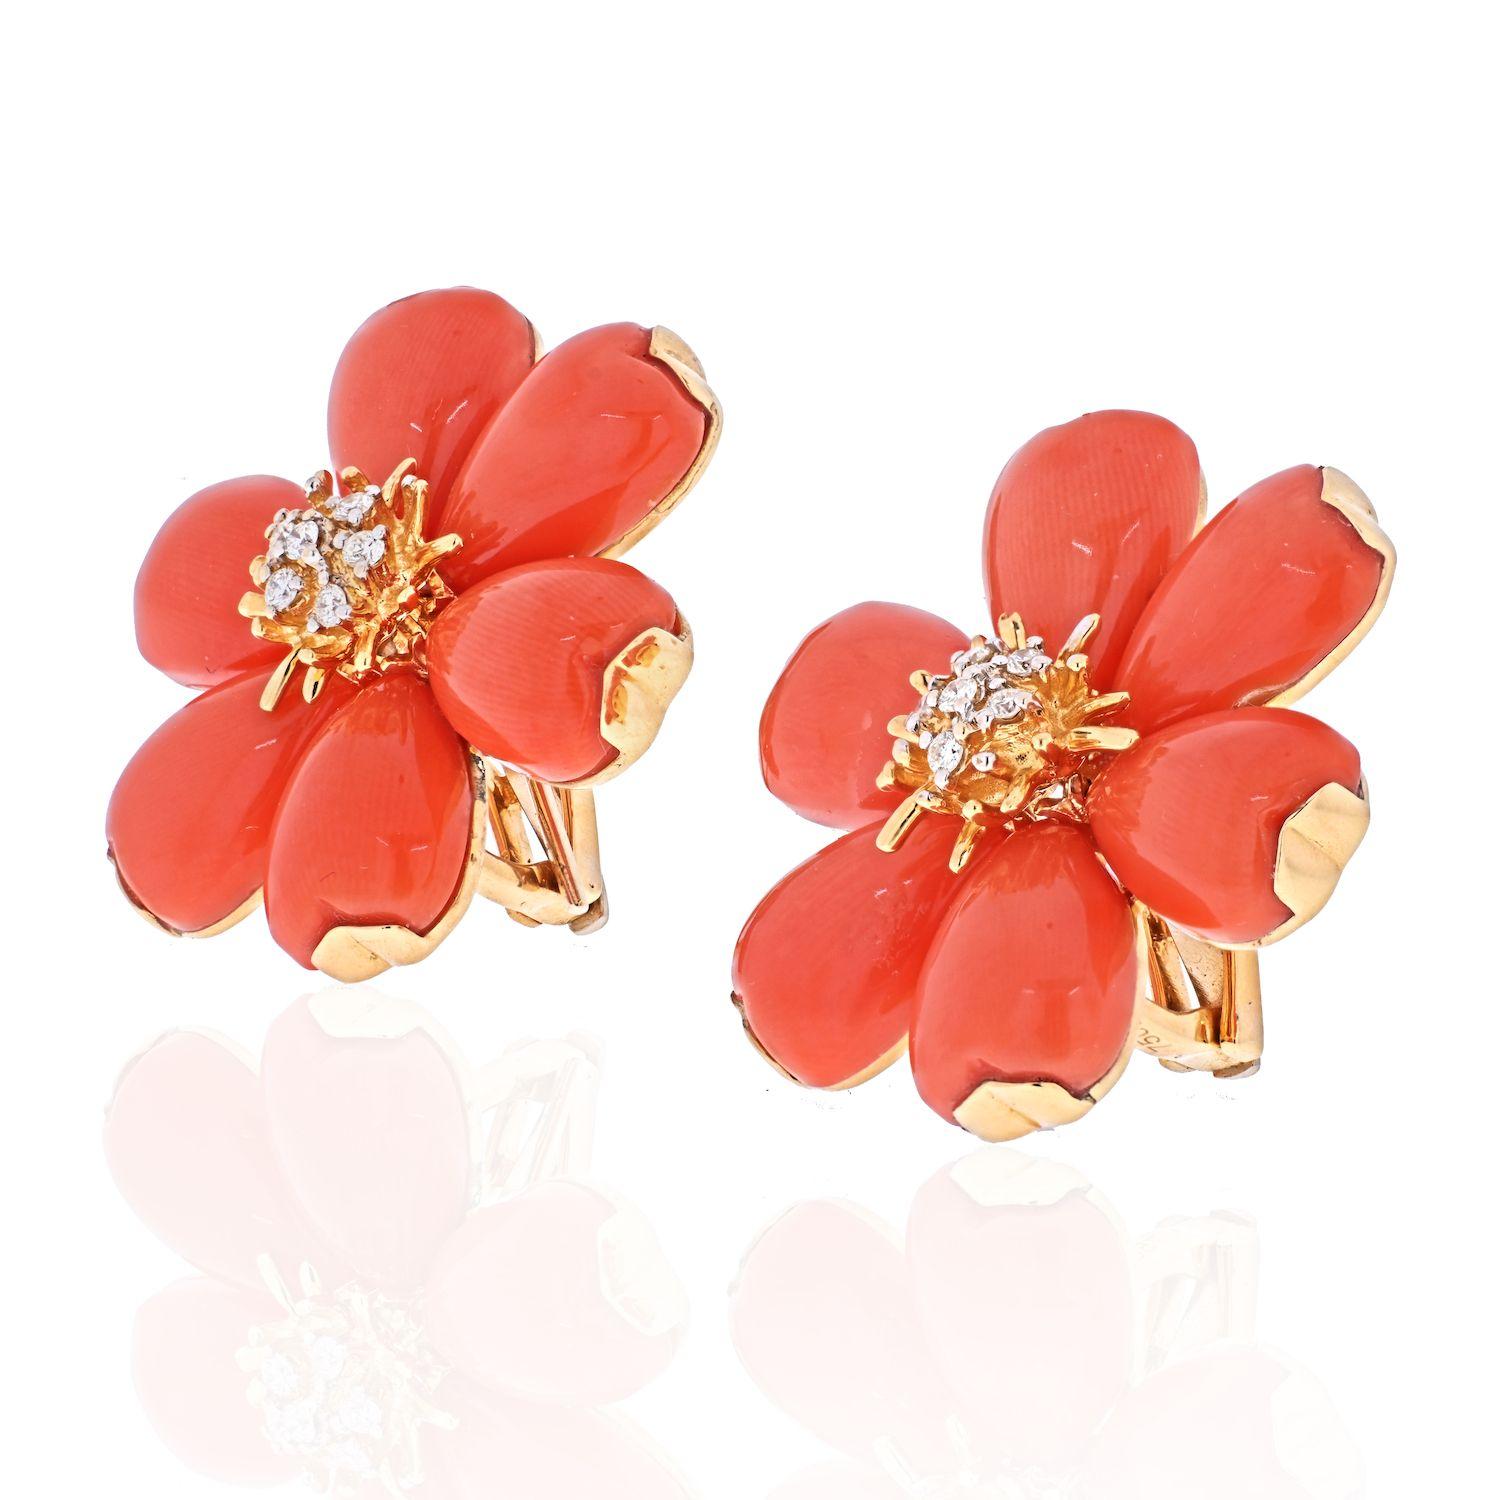 This is a pair of large earrings made in 18K yellow gold, mounted with round cut diamonds and are made of lovely bright orange coral. 
Clip on closure, where the posts can be added. 
These earrings are about 1.1 inches wide. 
